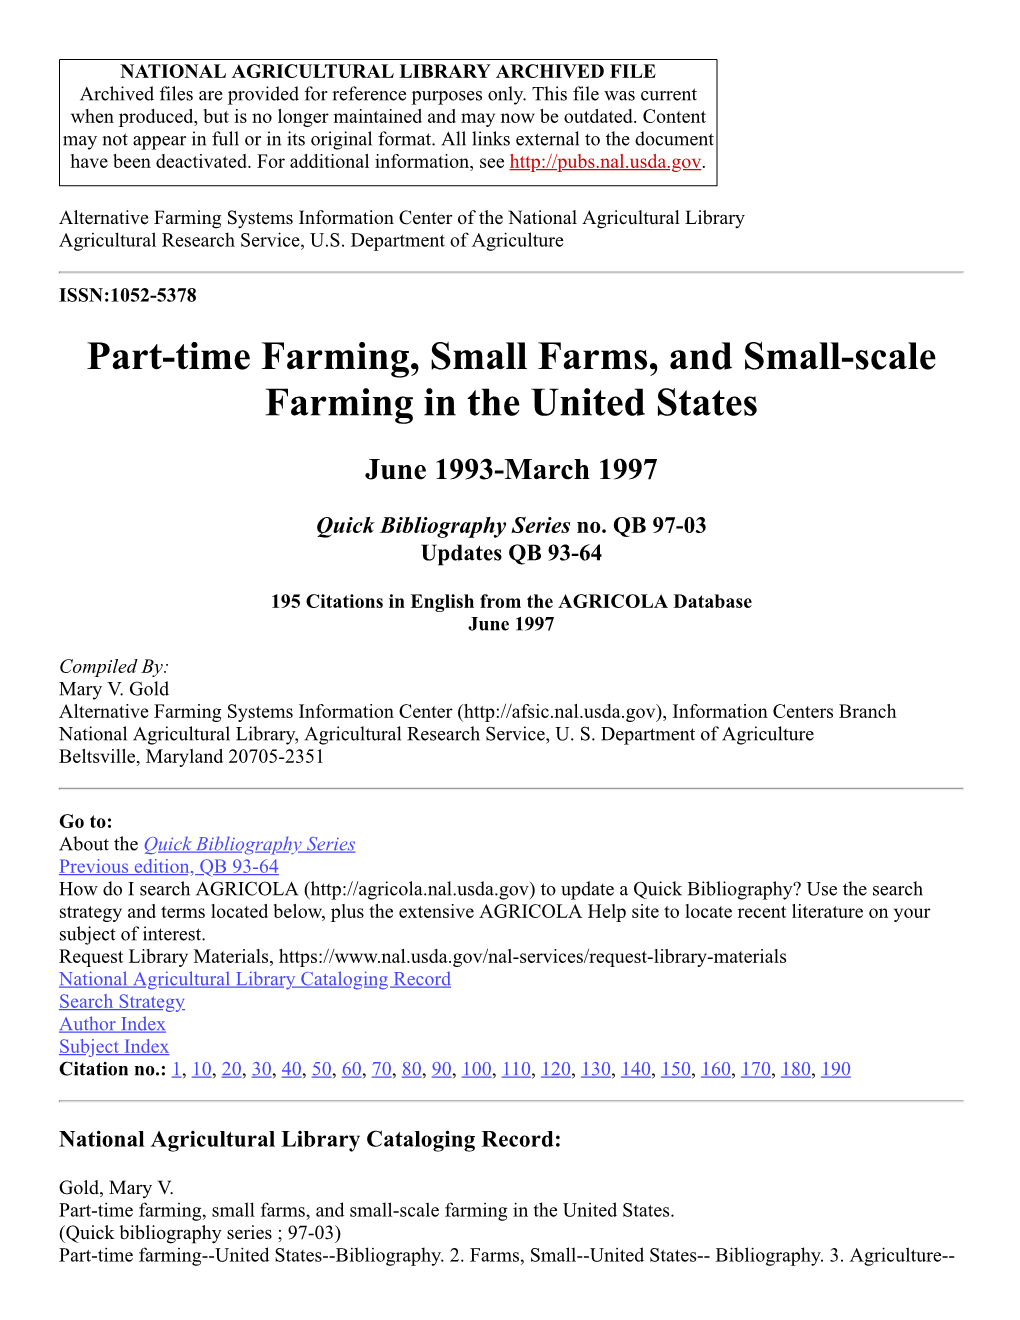 Part-Time Farming, Small Farms, and Small-Scale Farming in the United States